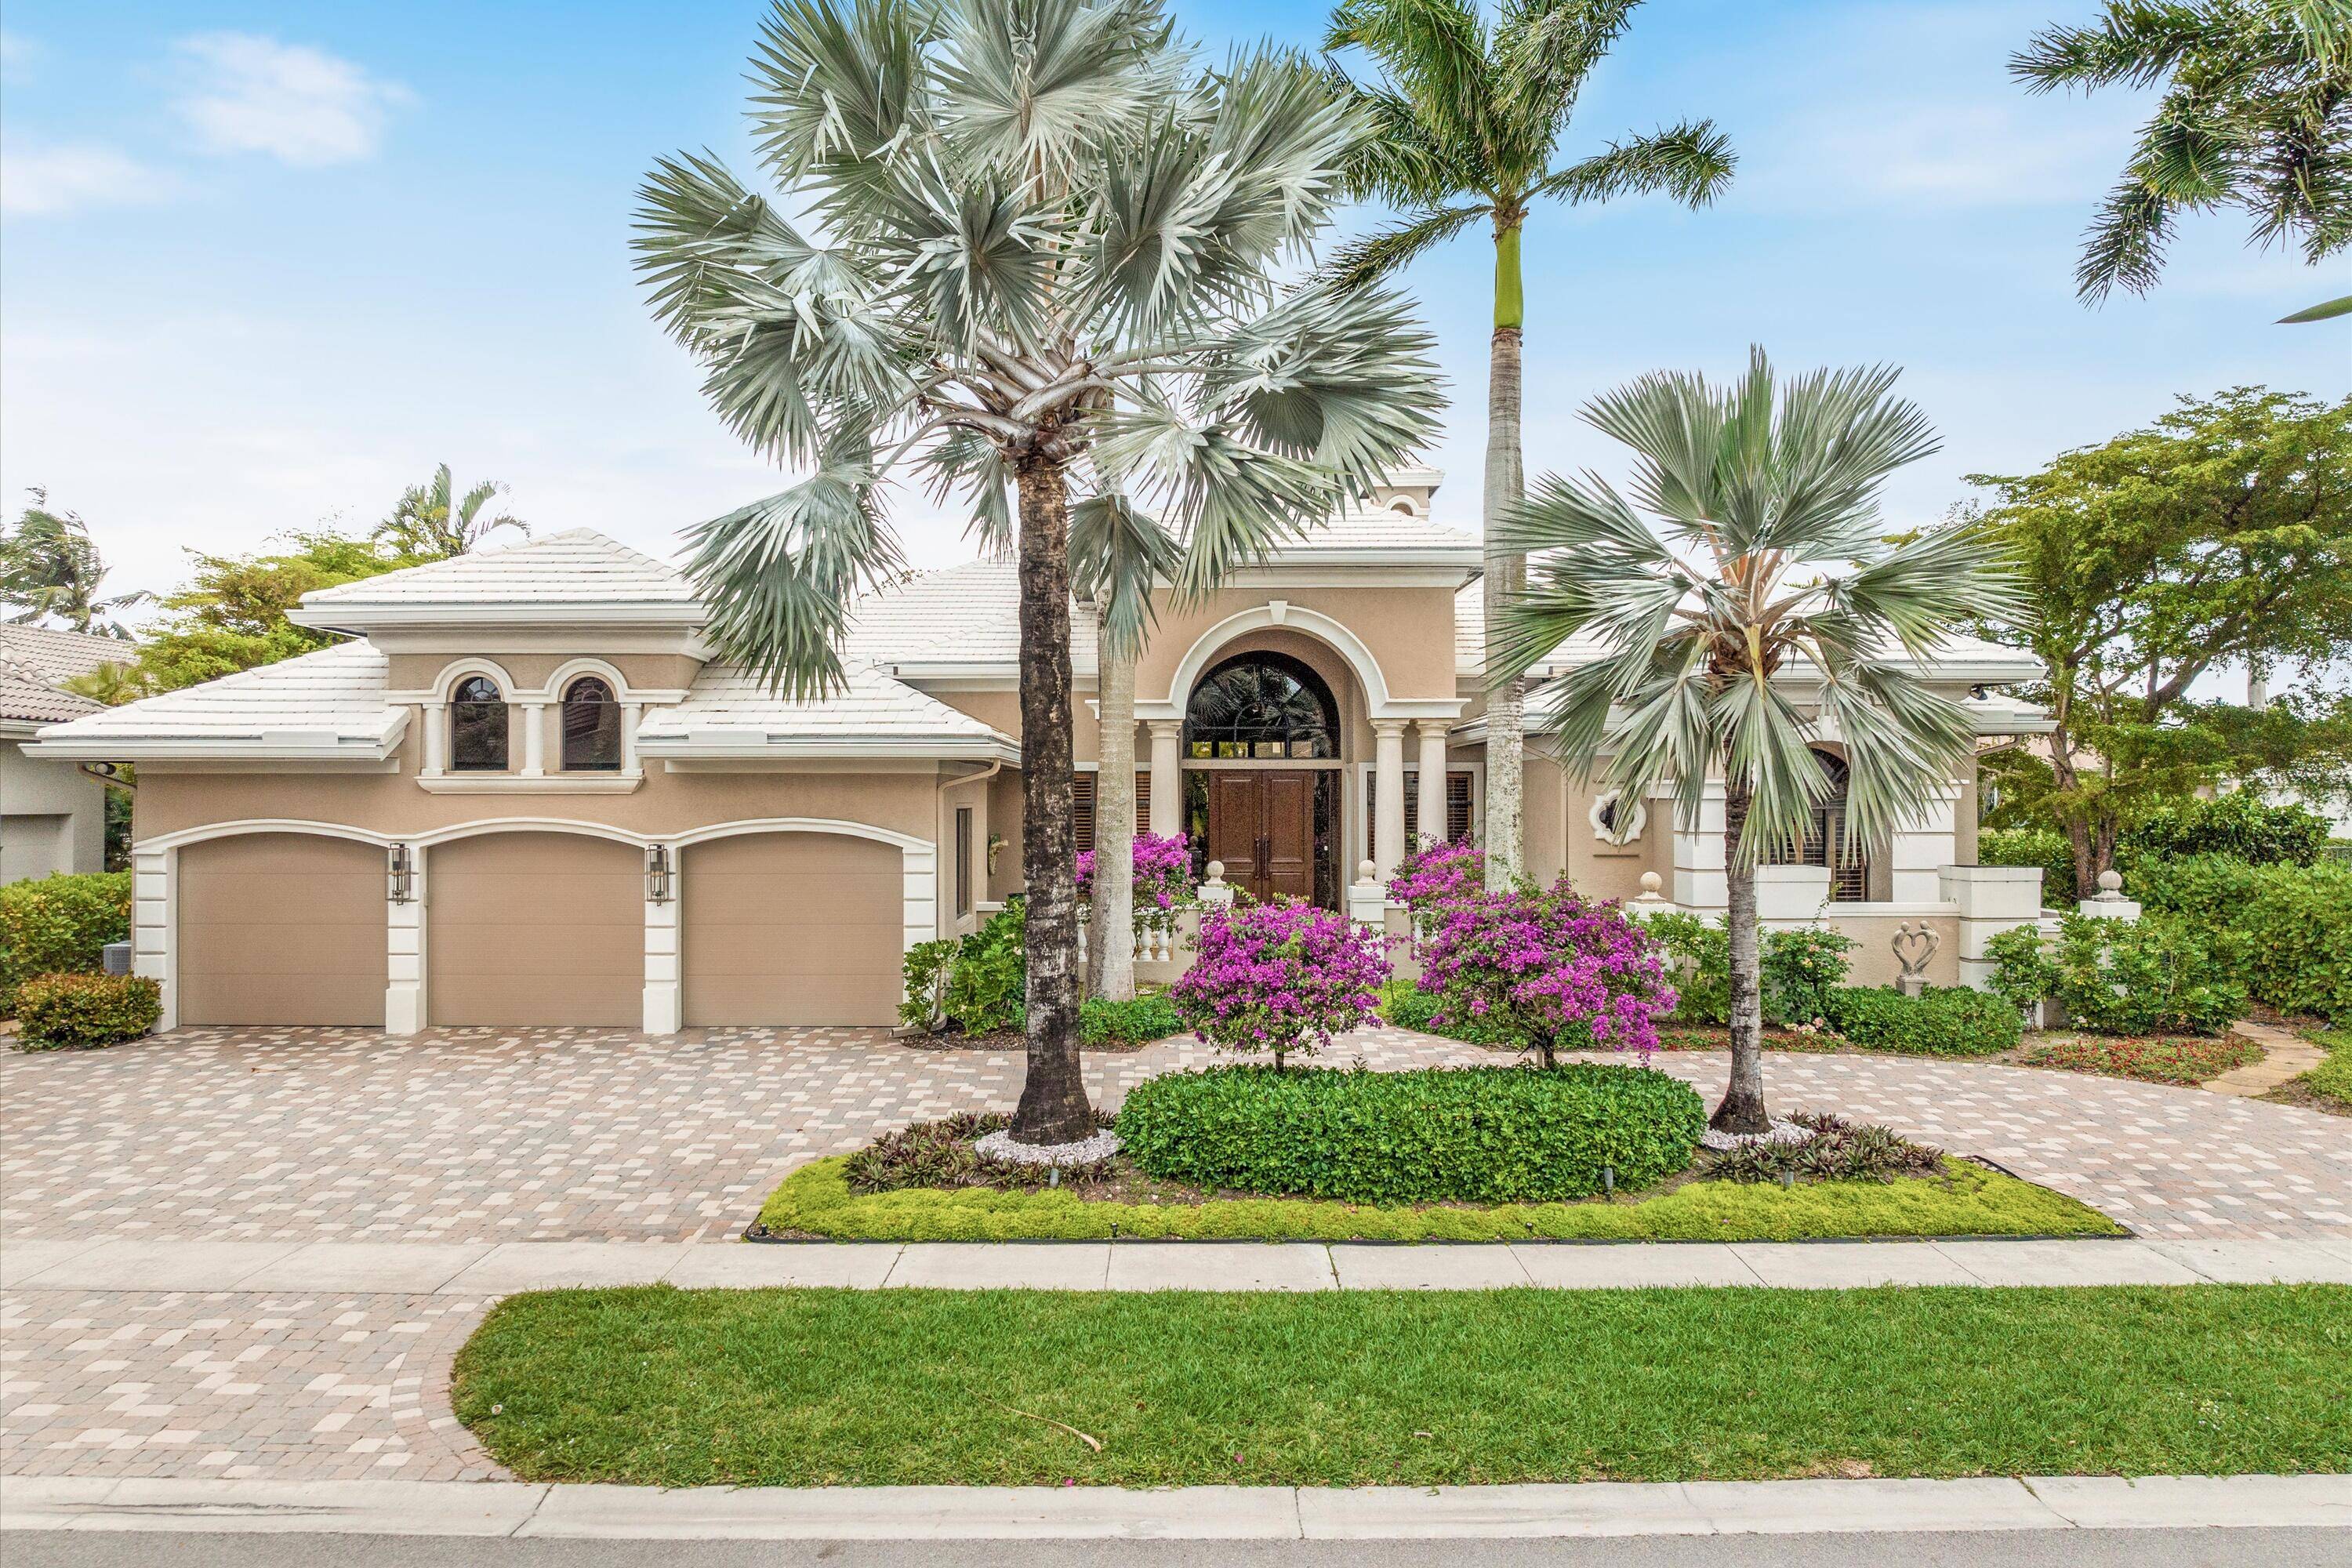 This exquisite one story estate home spans an impressive 5, 282 square feet, showcasing 4 bedrooms plus an office, 5.